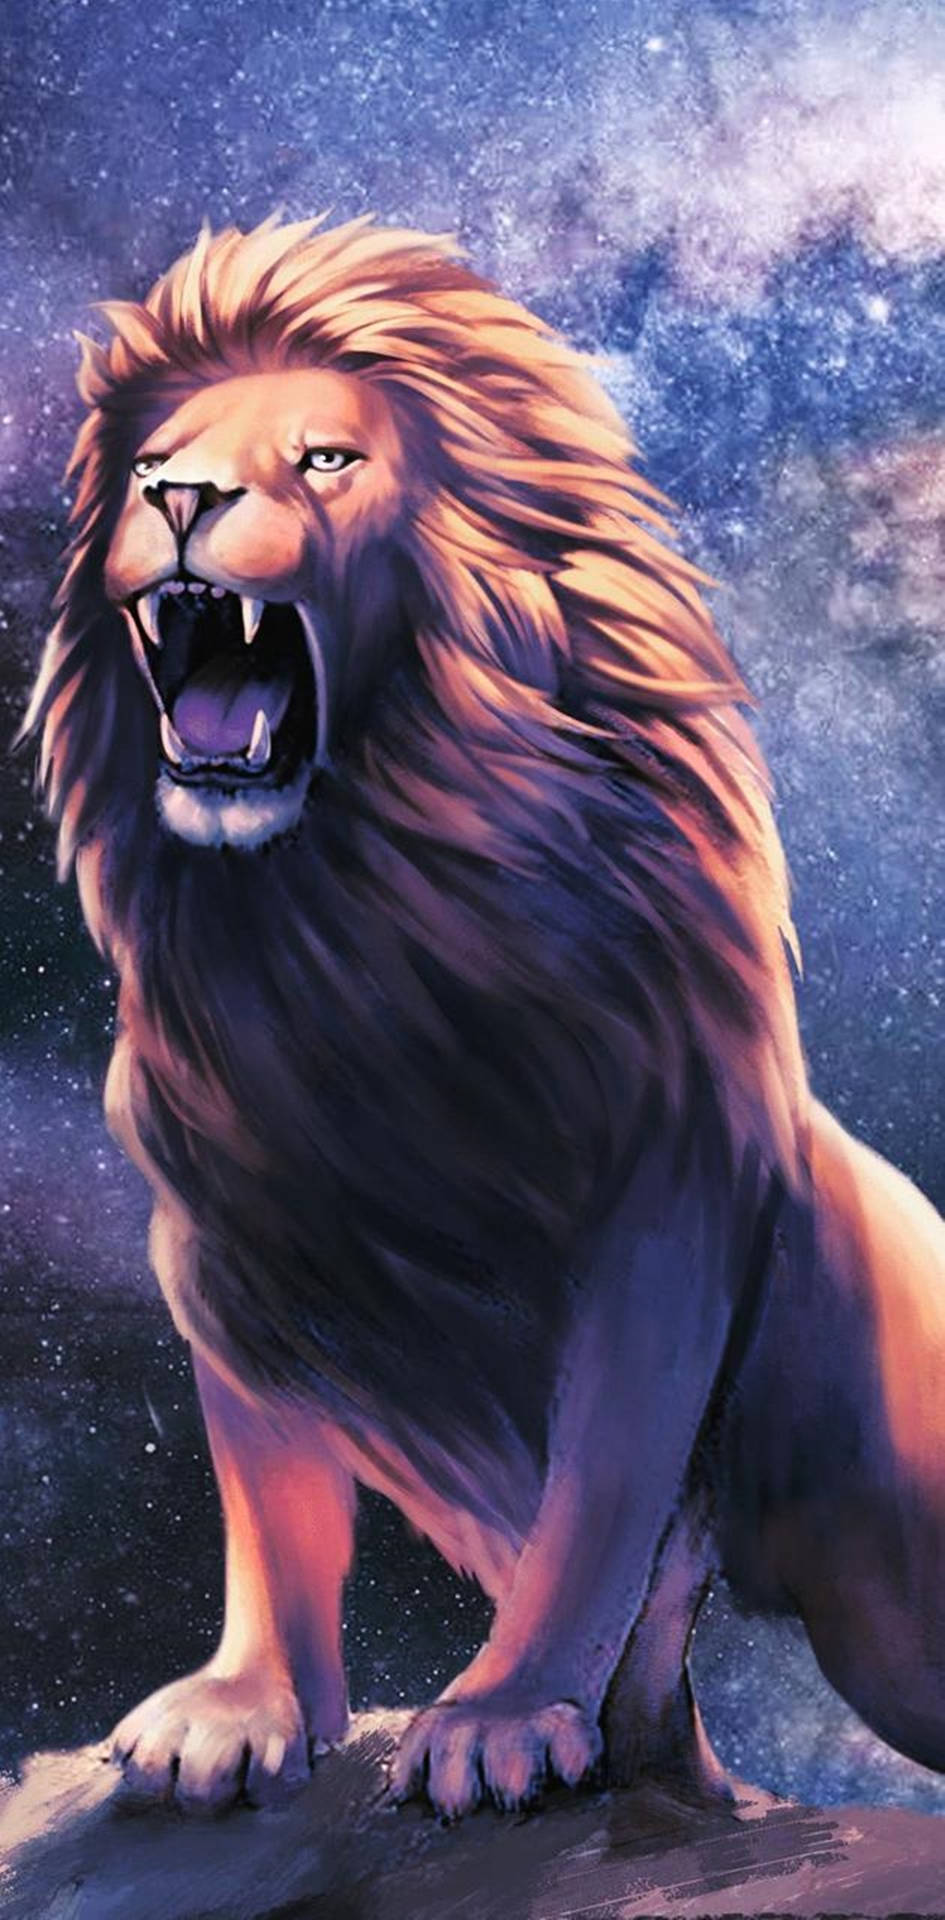 Download Angry Roaring Lion Galaxy Wallpaper | Wallpapers.com